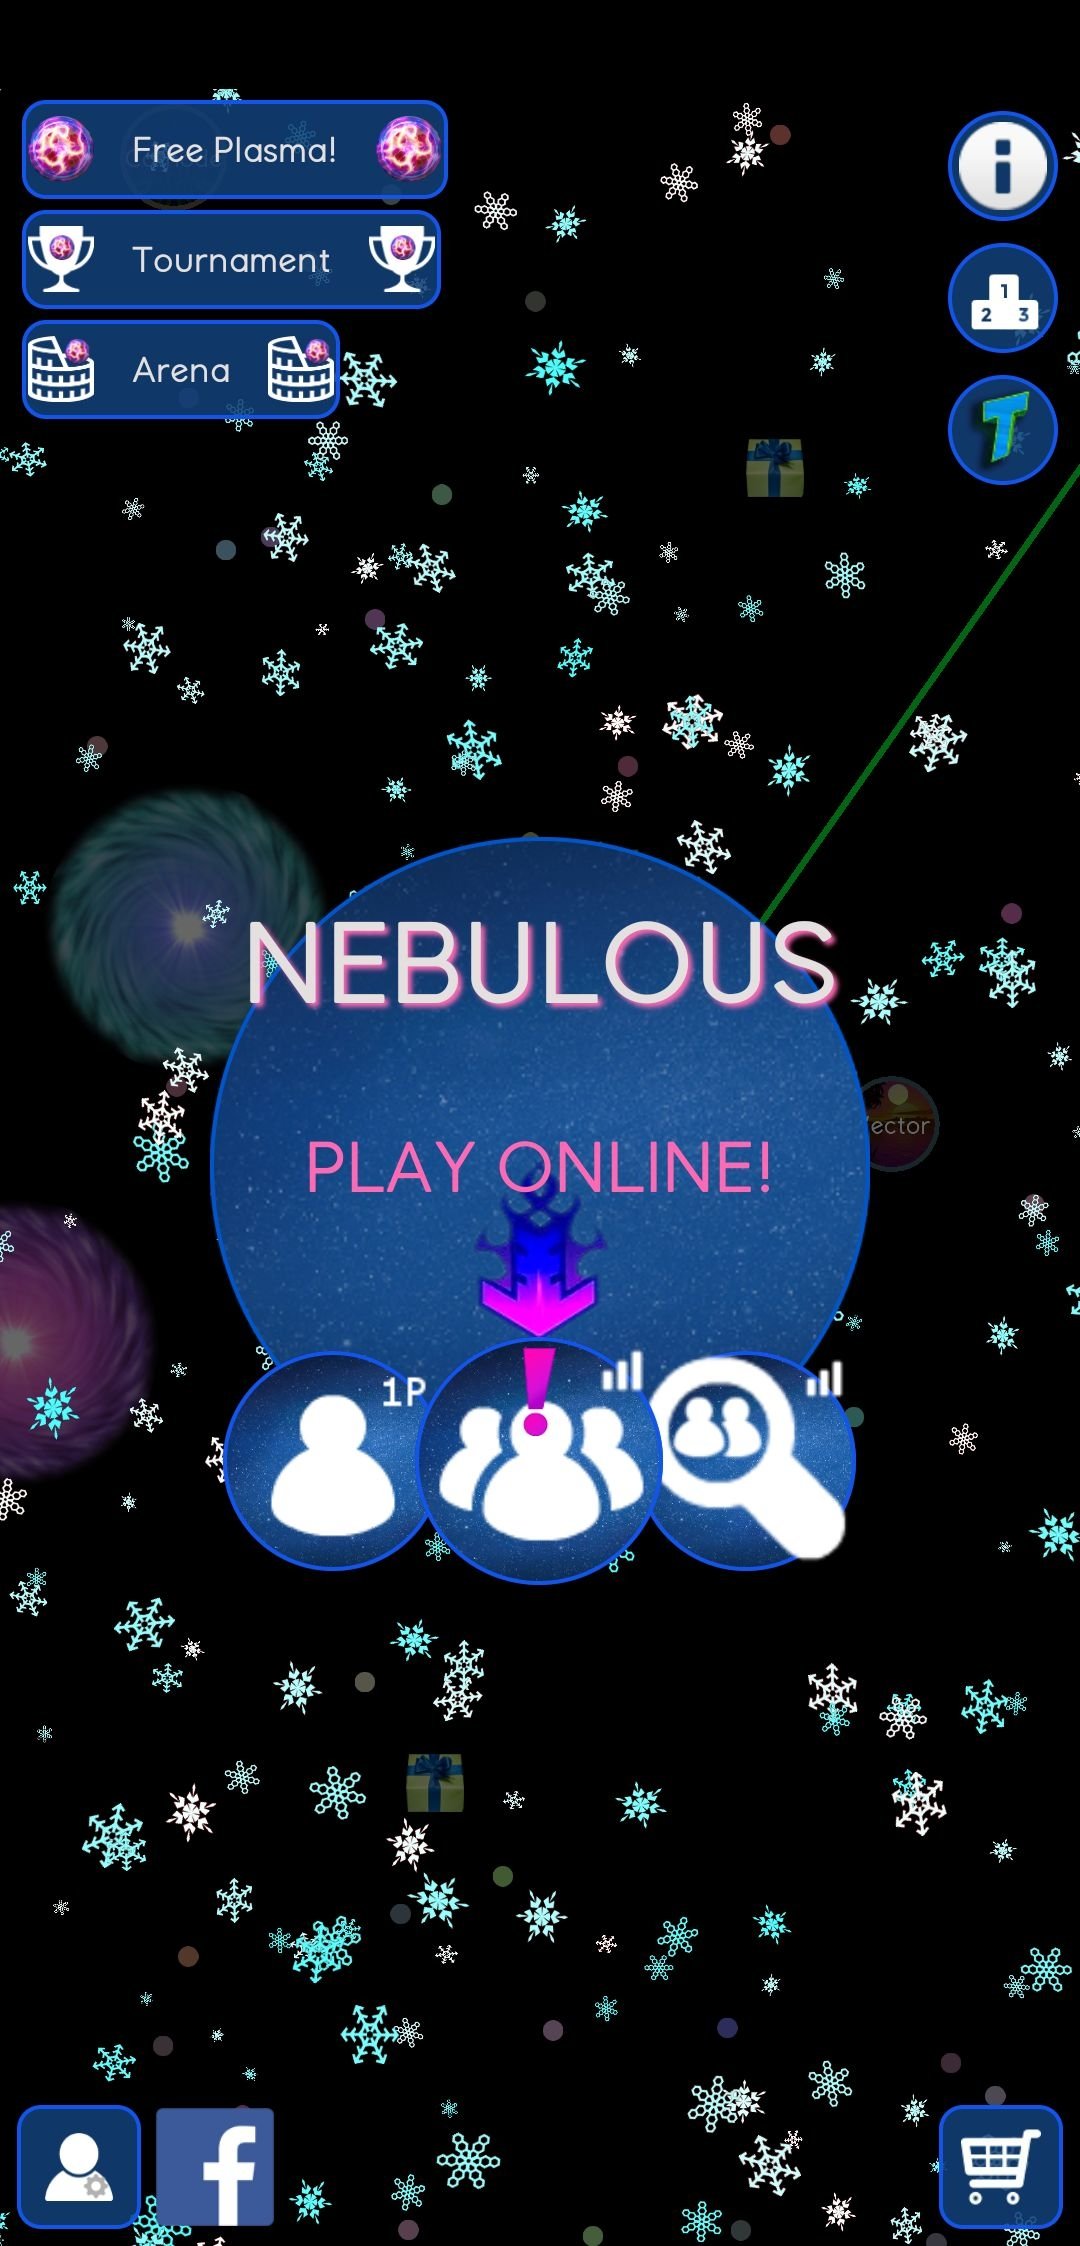 Nebulousio 3101 Descargar Para Android Apk Gratis - the roblox skins for android apk download